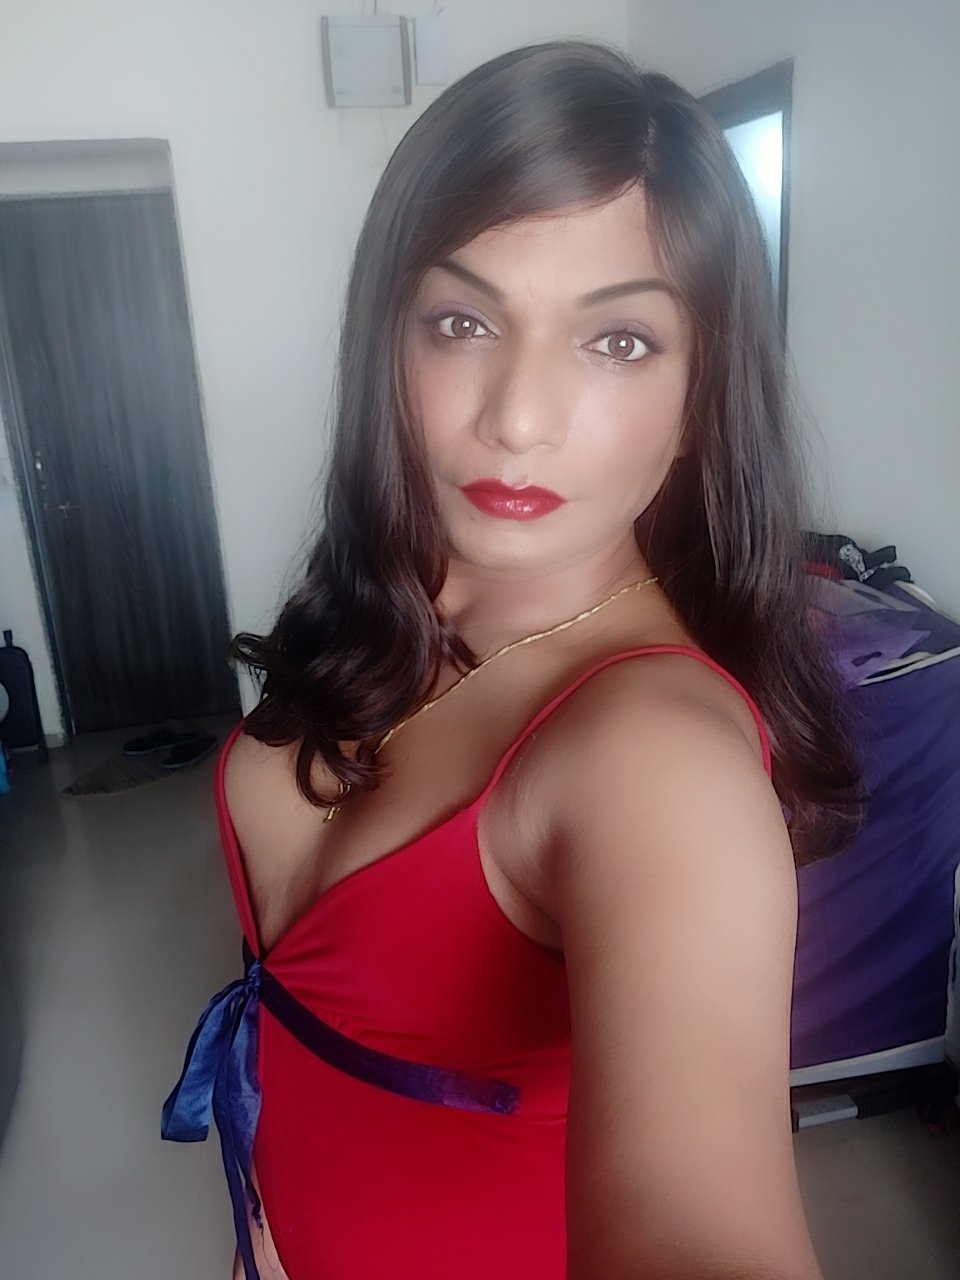 Shemail Number For Sex In Pune - Hazeldom69, Indian Transsexual dominatrix in Bangalore